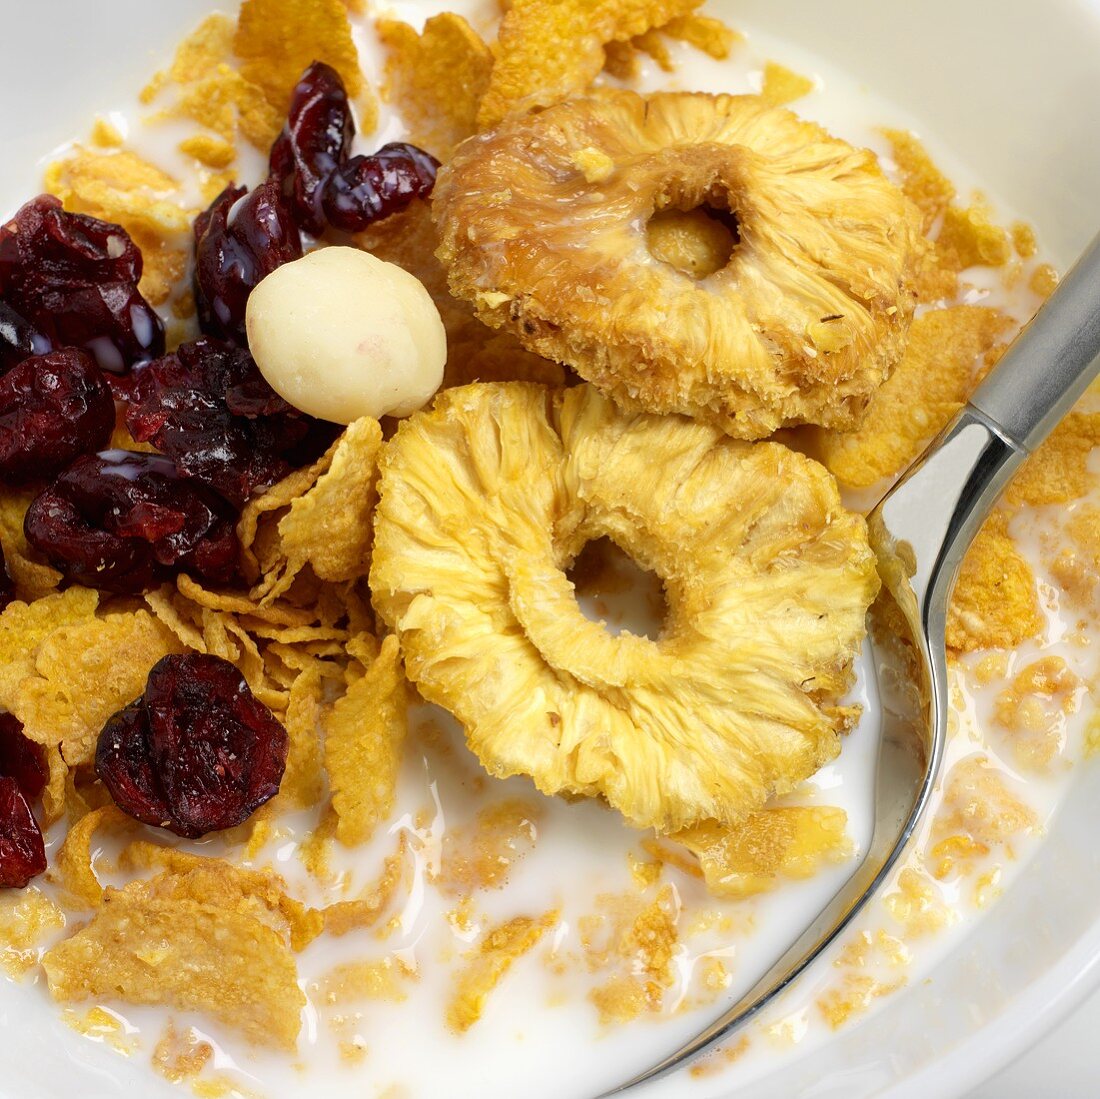 Cornflakes with milk, dried fruit and nuts